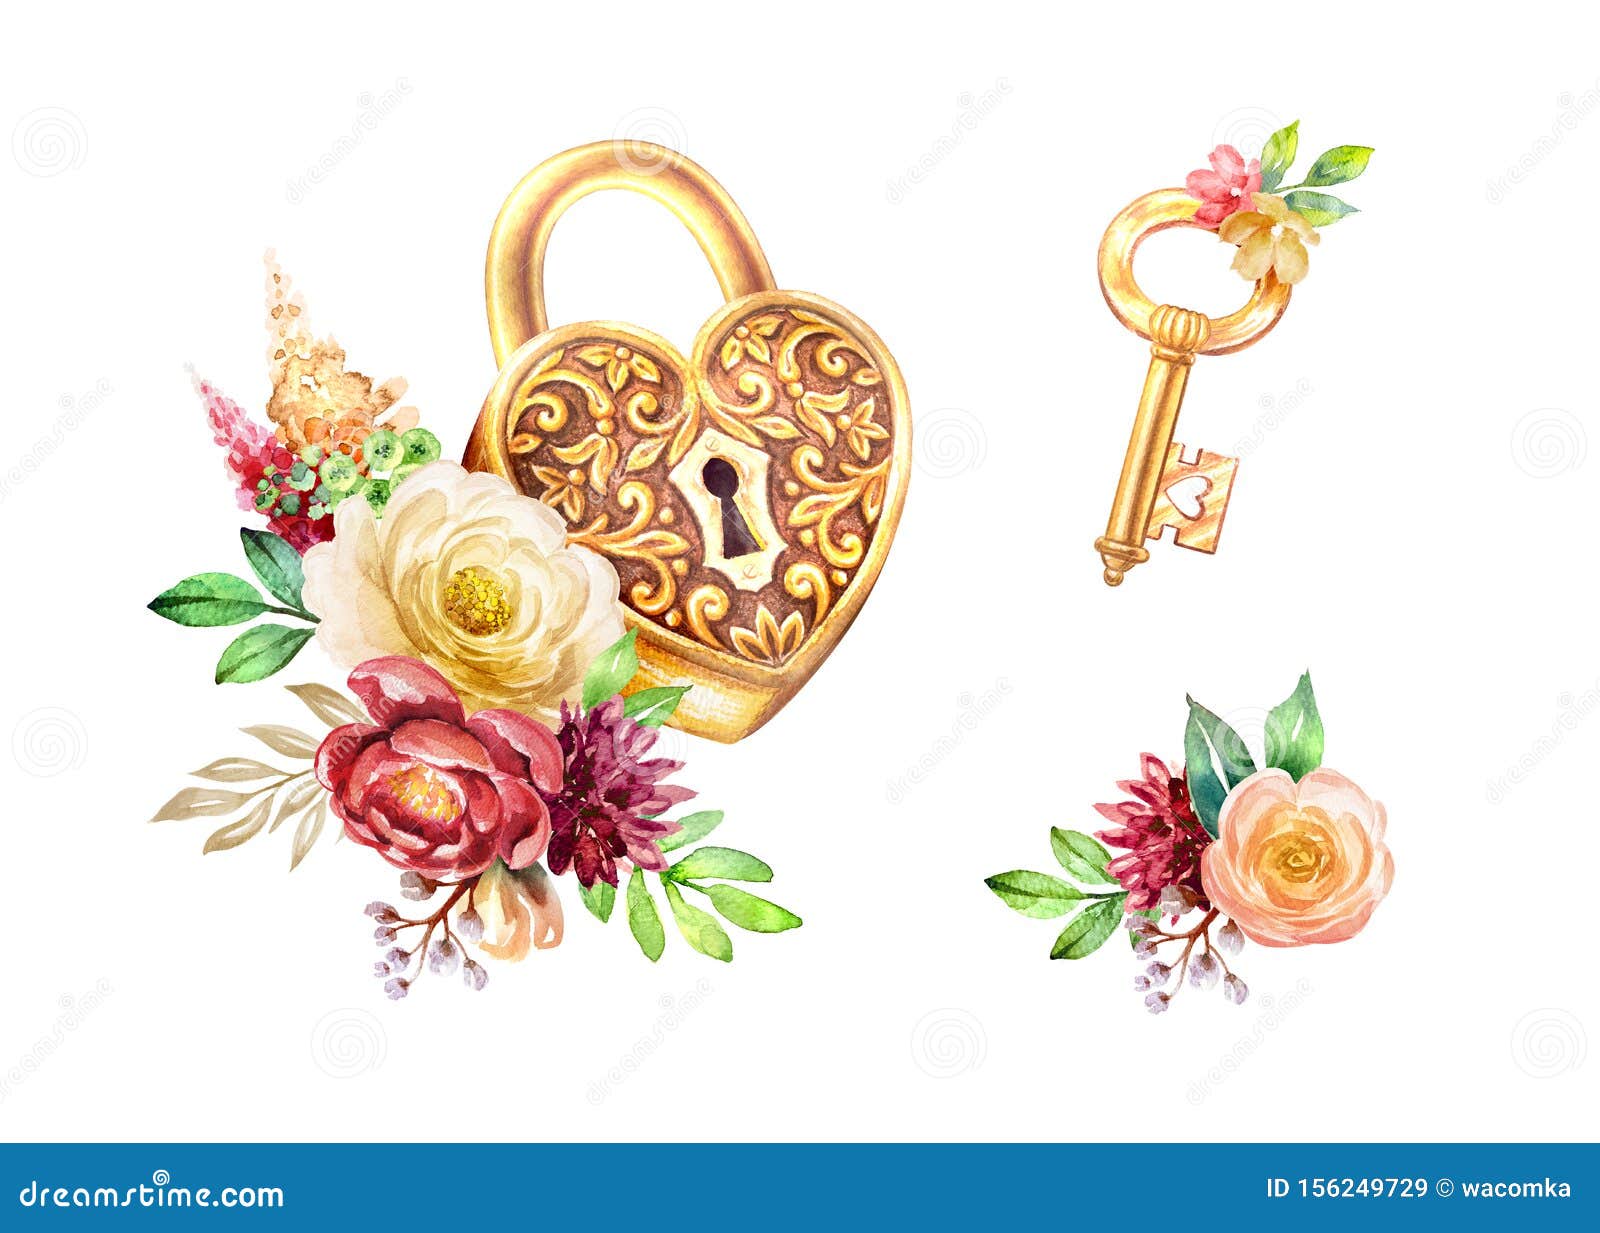 Heart and flowers keyclip